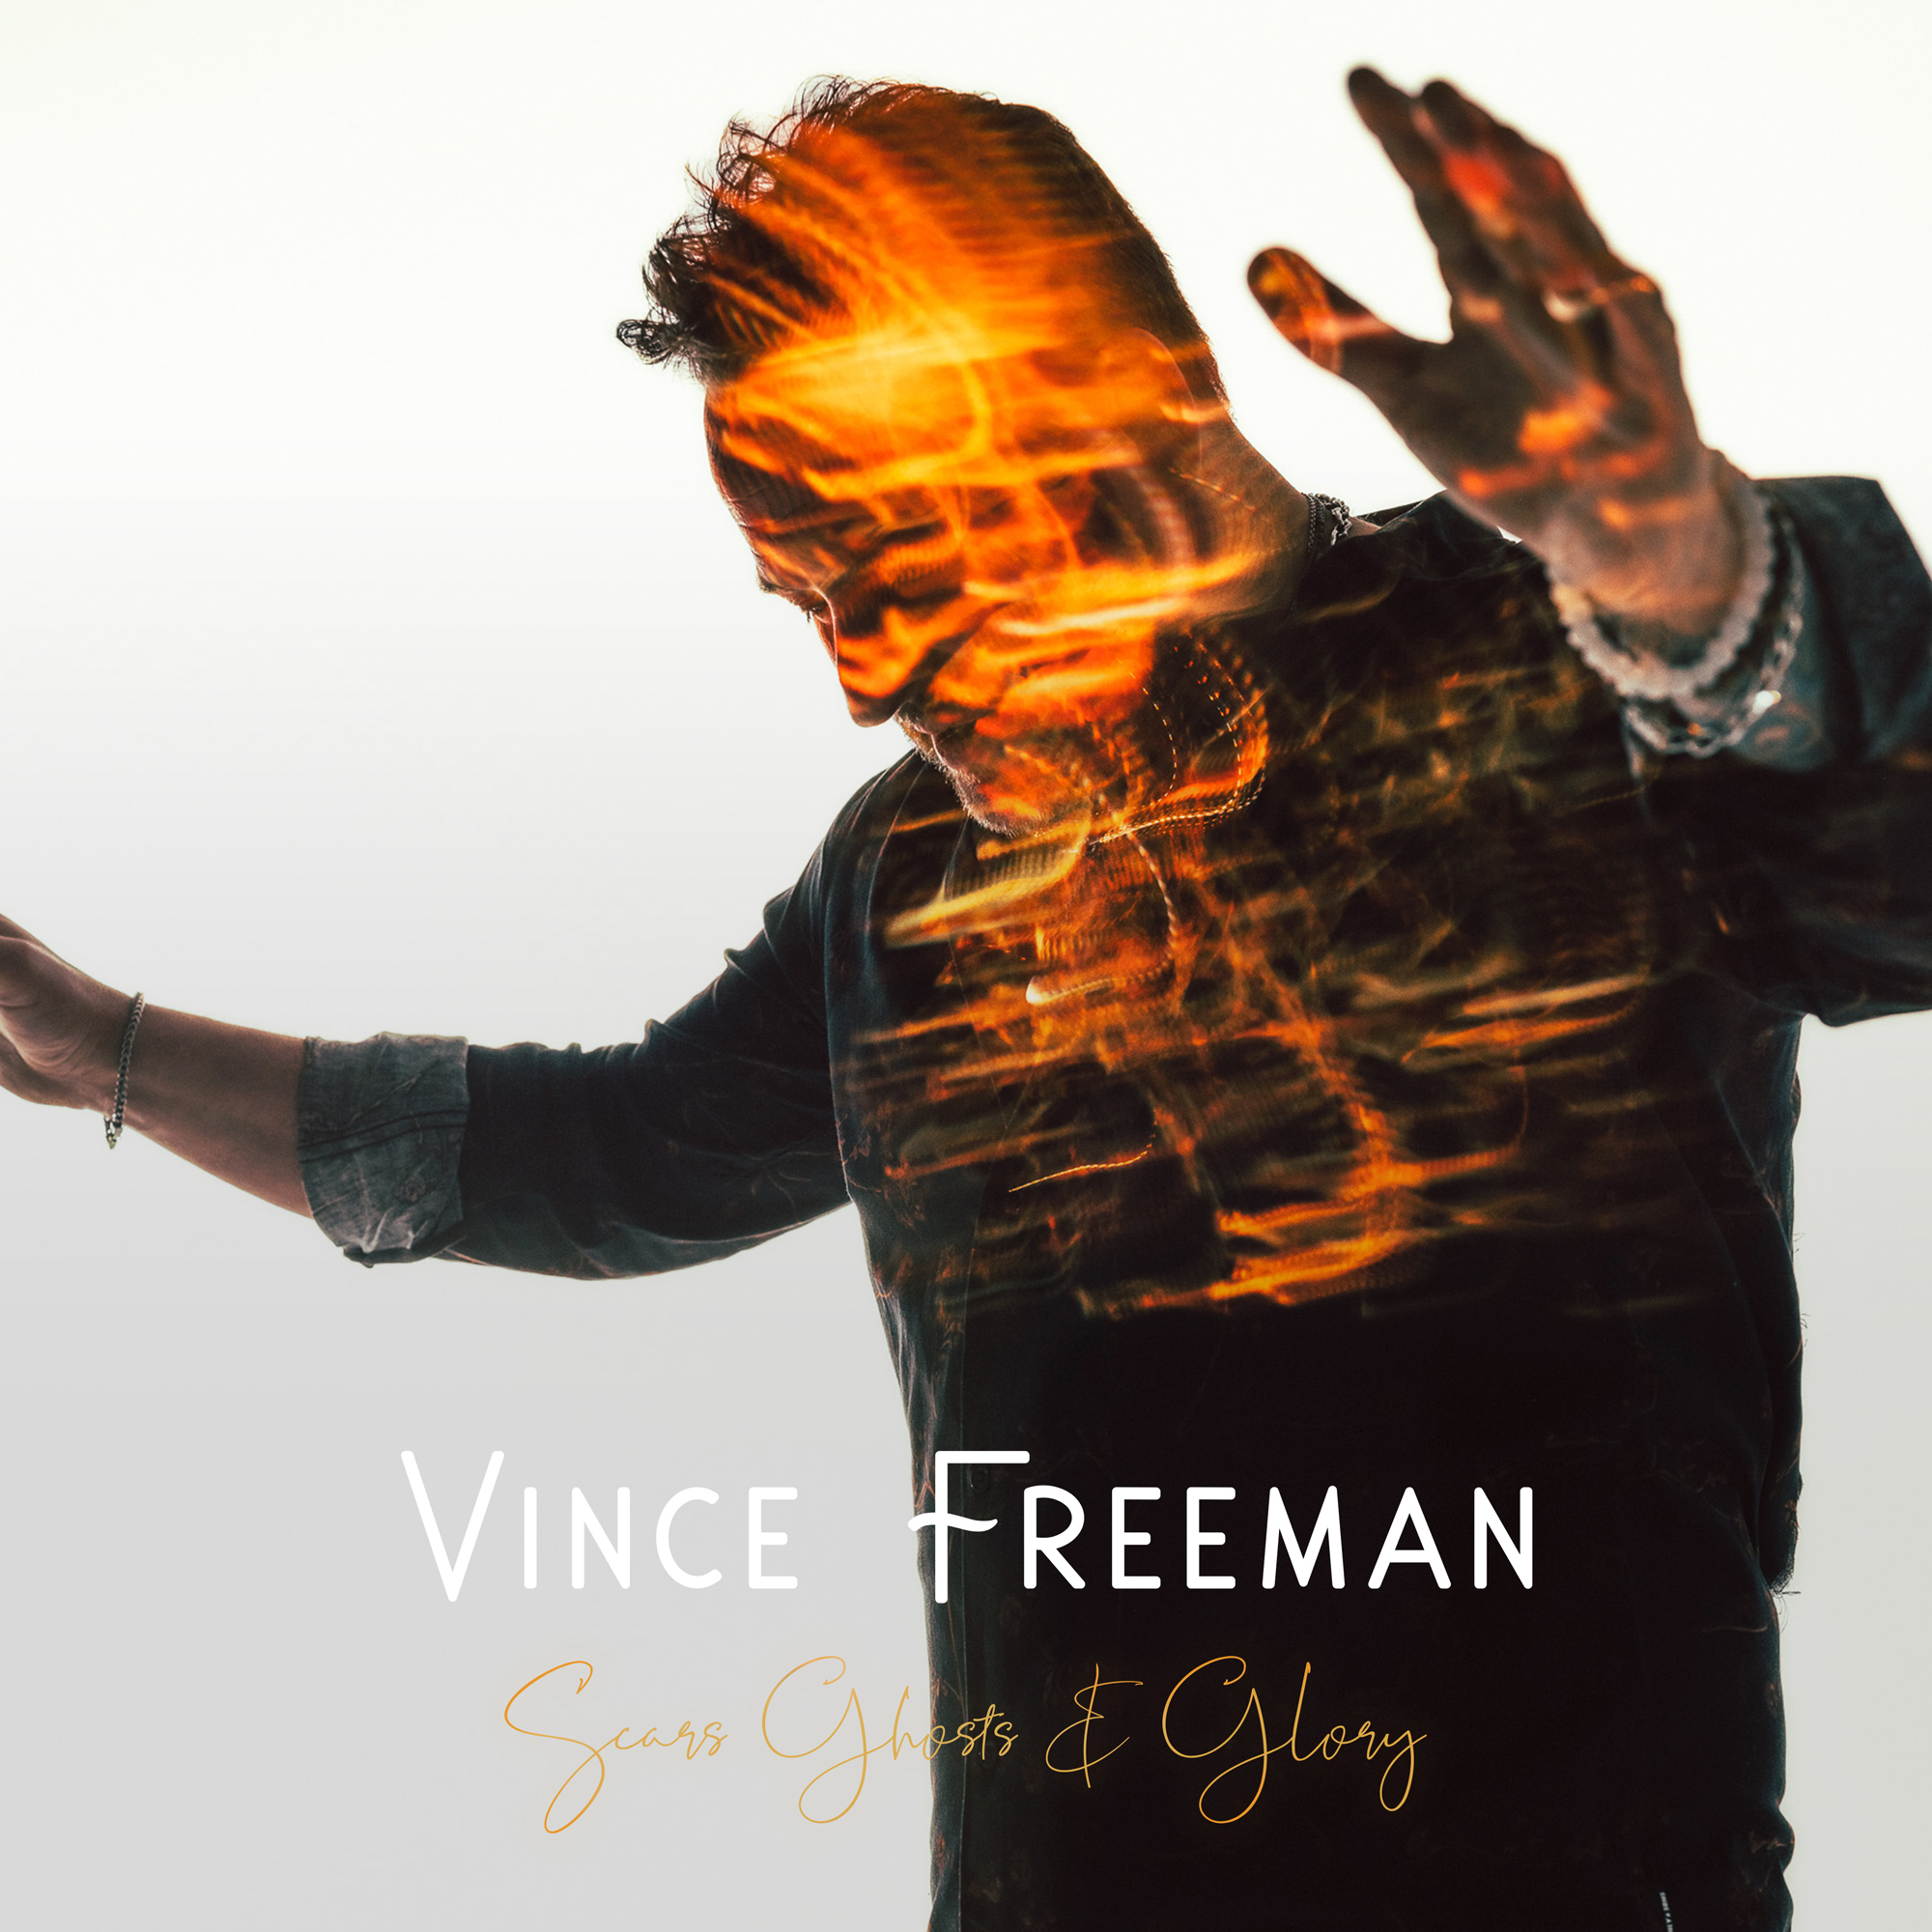 VINCE FREEMAN ANNOUNCES LONG-AWAITED DEBUT LP SCARS, GHOSTS & GLORY SET FOR RELEASE MARCH 2024